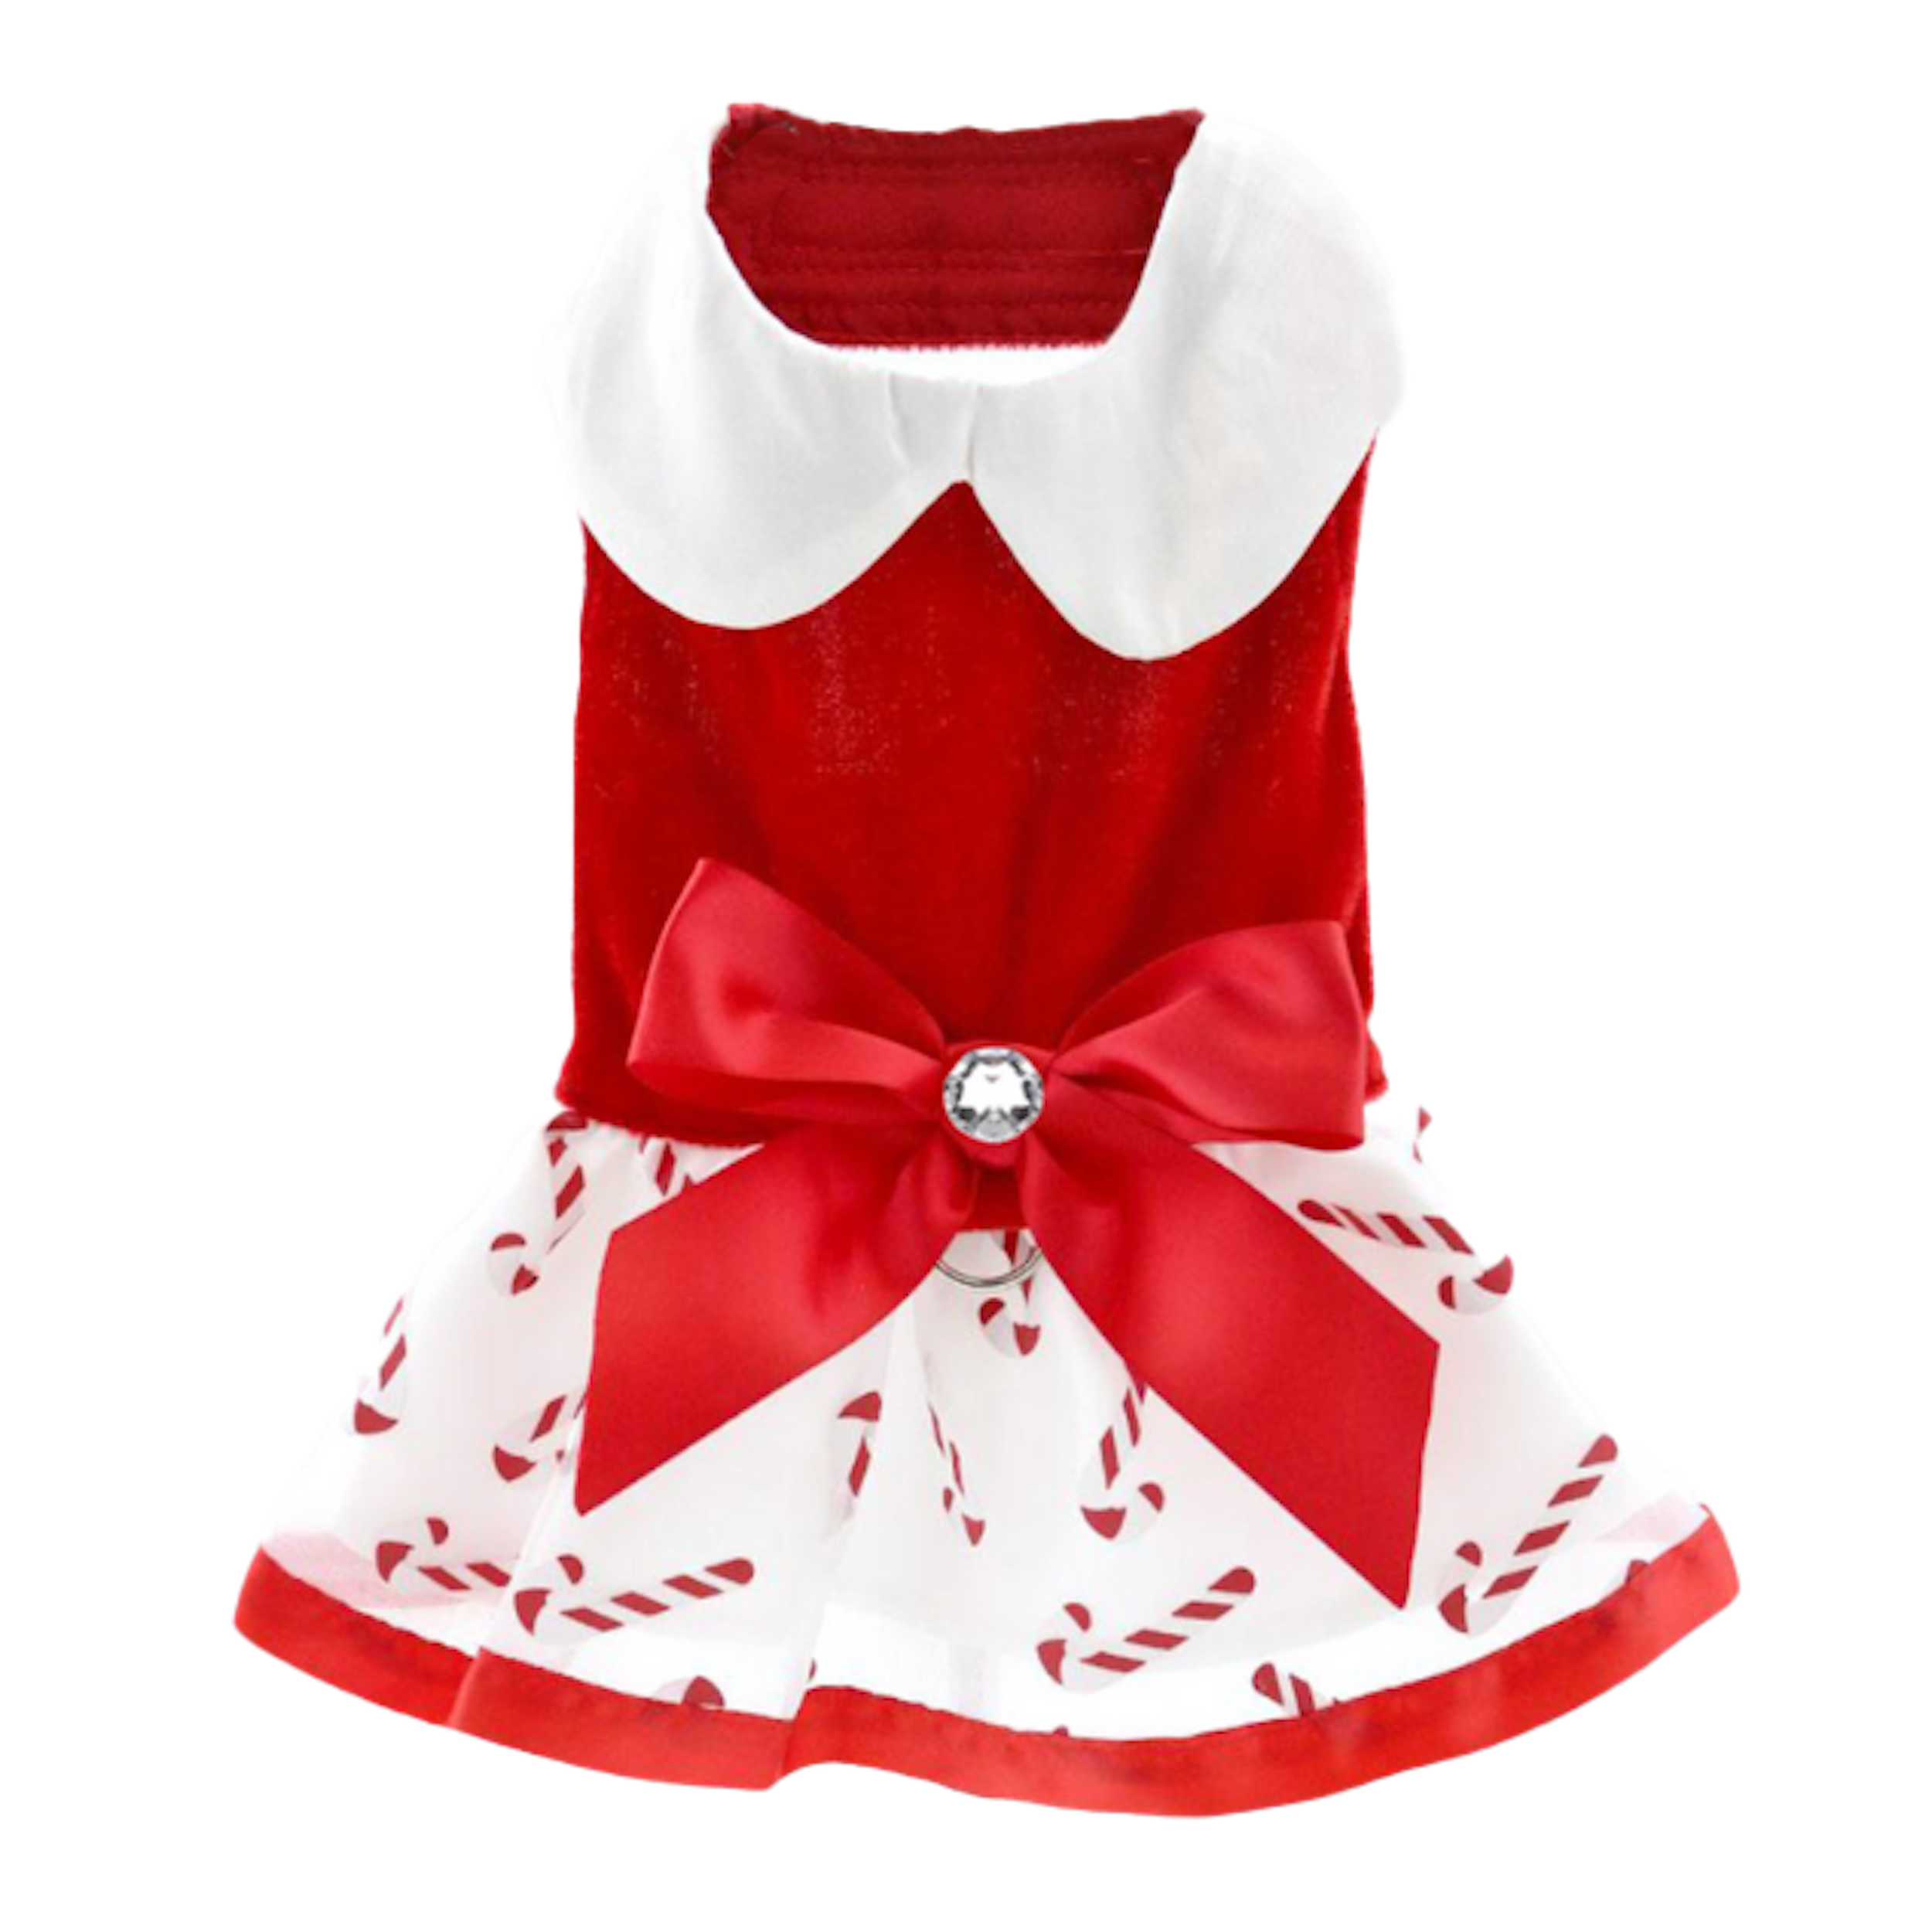 CHRISTMAS-RED-WHITE-HOLIDAY-DOG-PARTY-DRESS-BOULDERBARKS